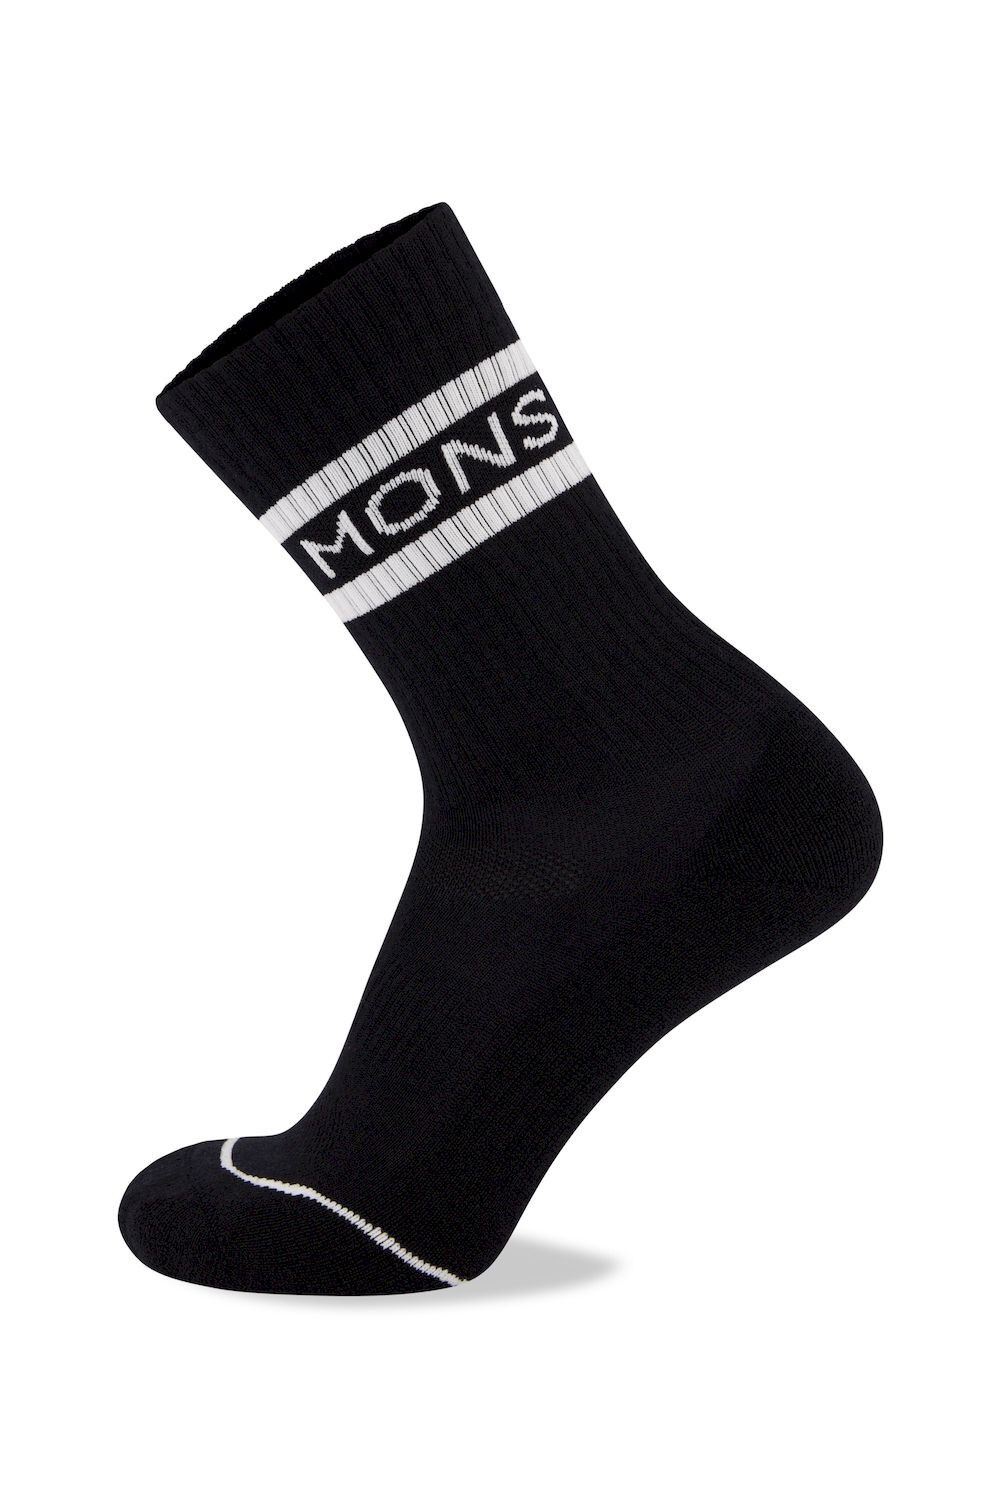 Mons Royale Signature Crew Sock - Calze ciclismo